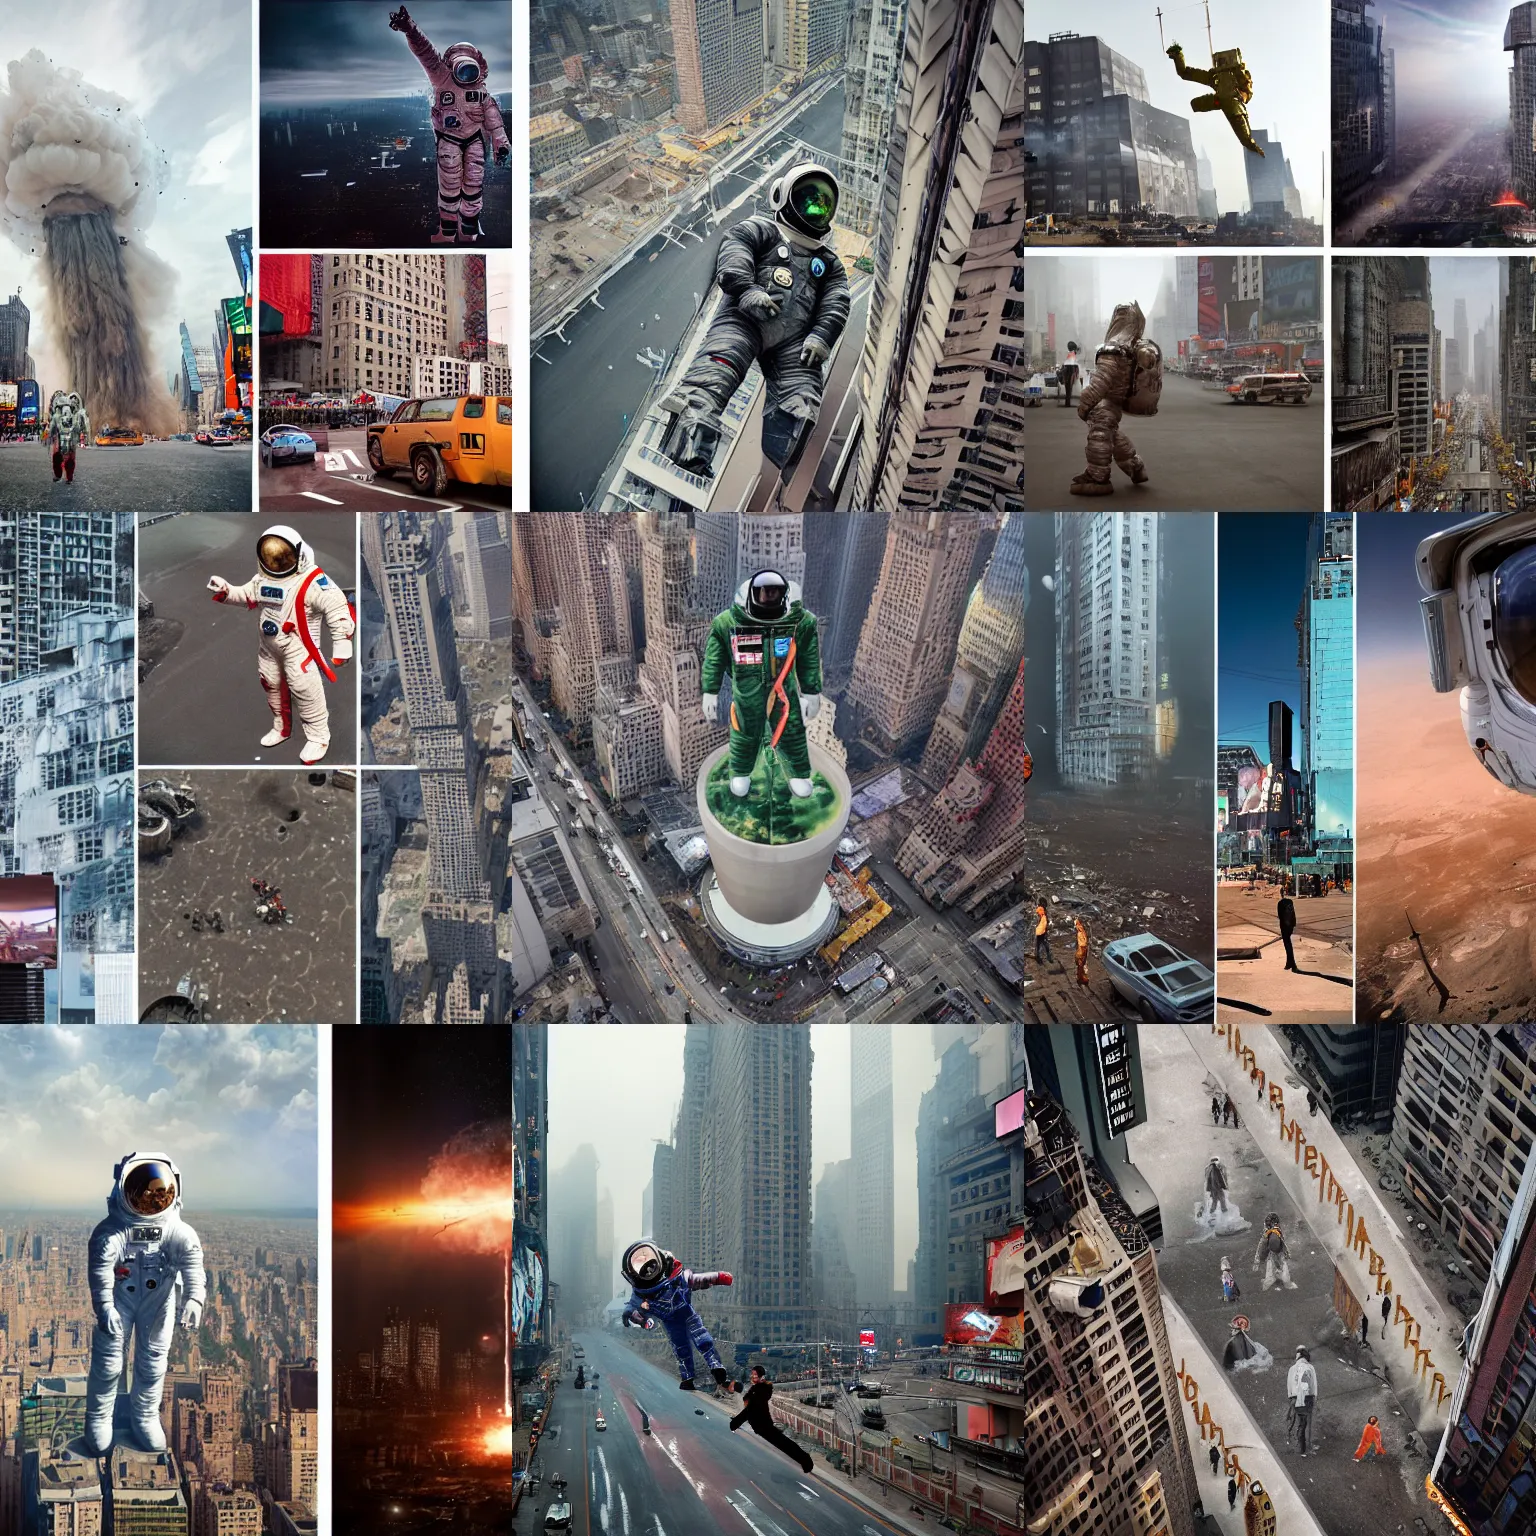 Prompt: giant hulked oversized american spacesuit astronaut in postapocalyptic times square nuclear bombing, overcast, birds eye view, by steve mccurry, by oleg oprisco, by thomas peschak, by nasal, by victor enrich, by gregory crewdson